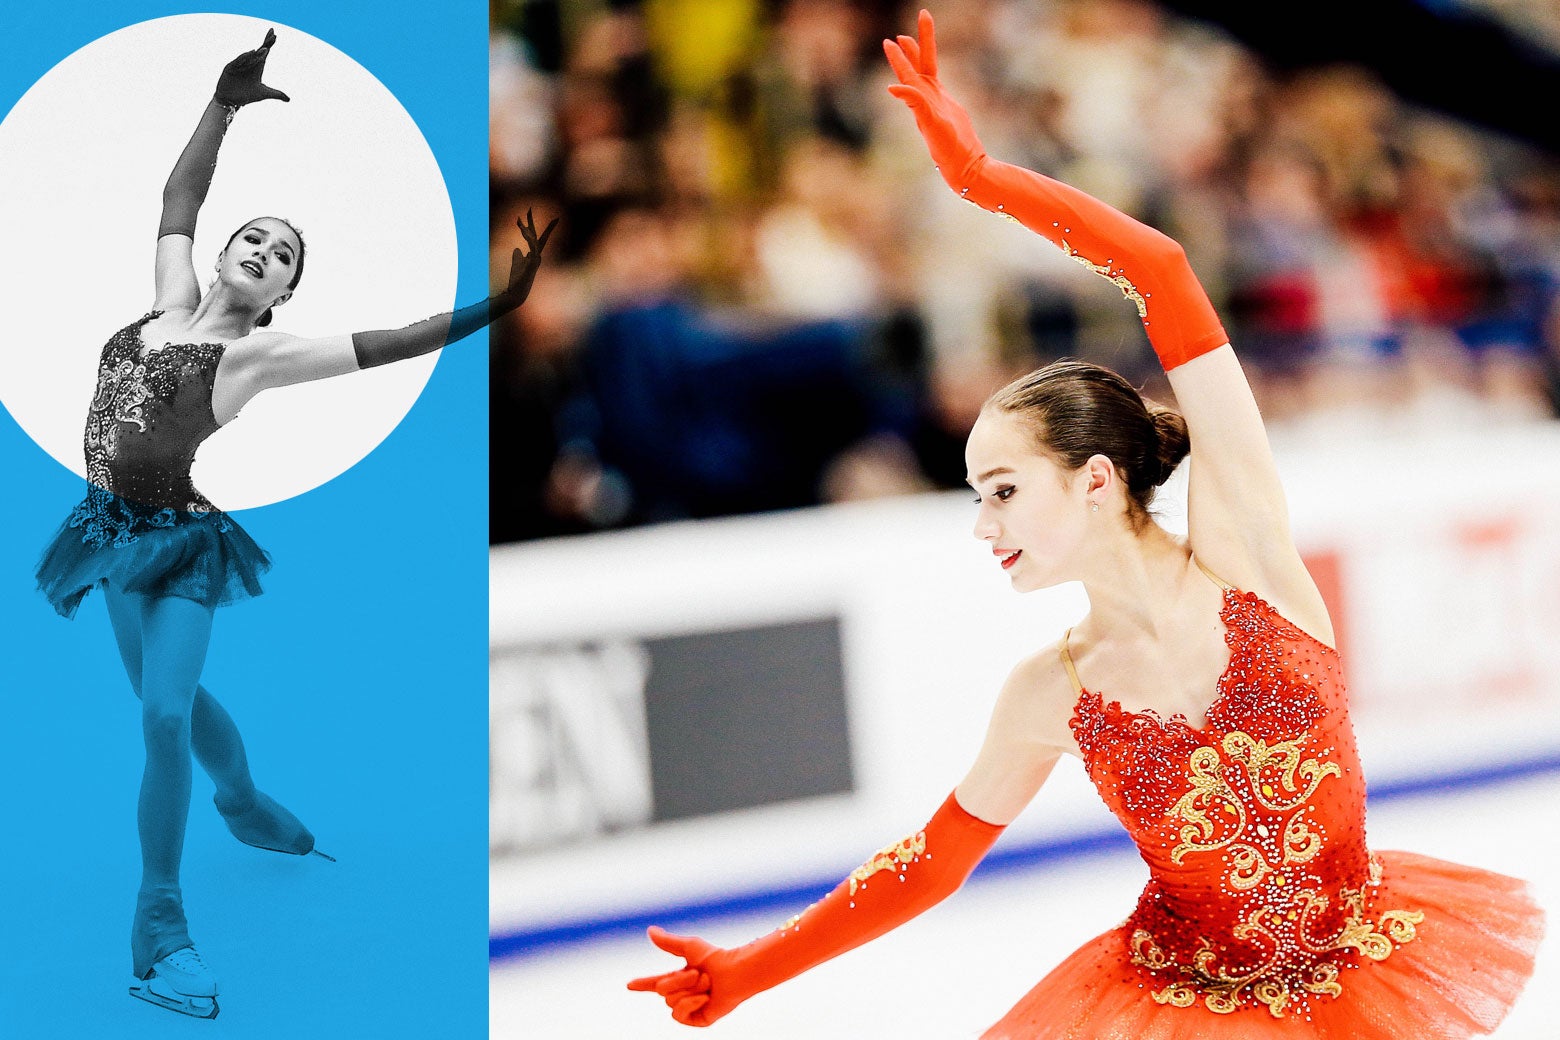 A collage of two images of Alina Zagitova skating (in her red tutu).